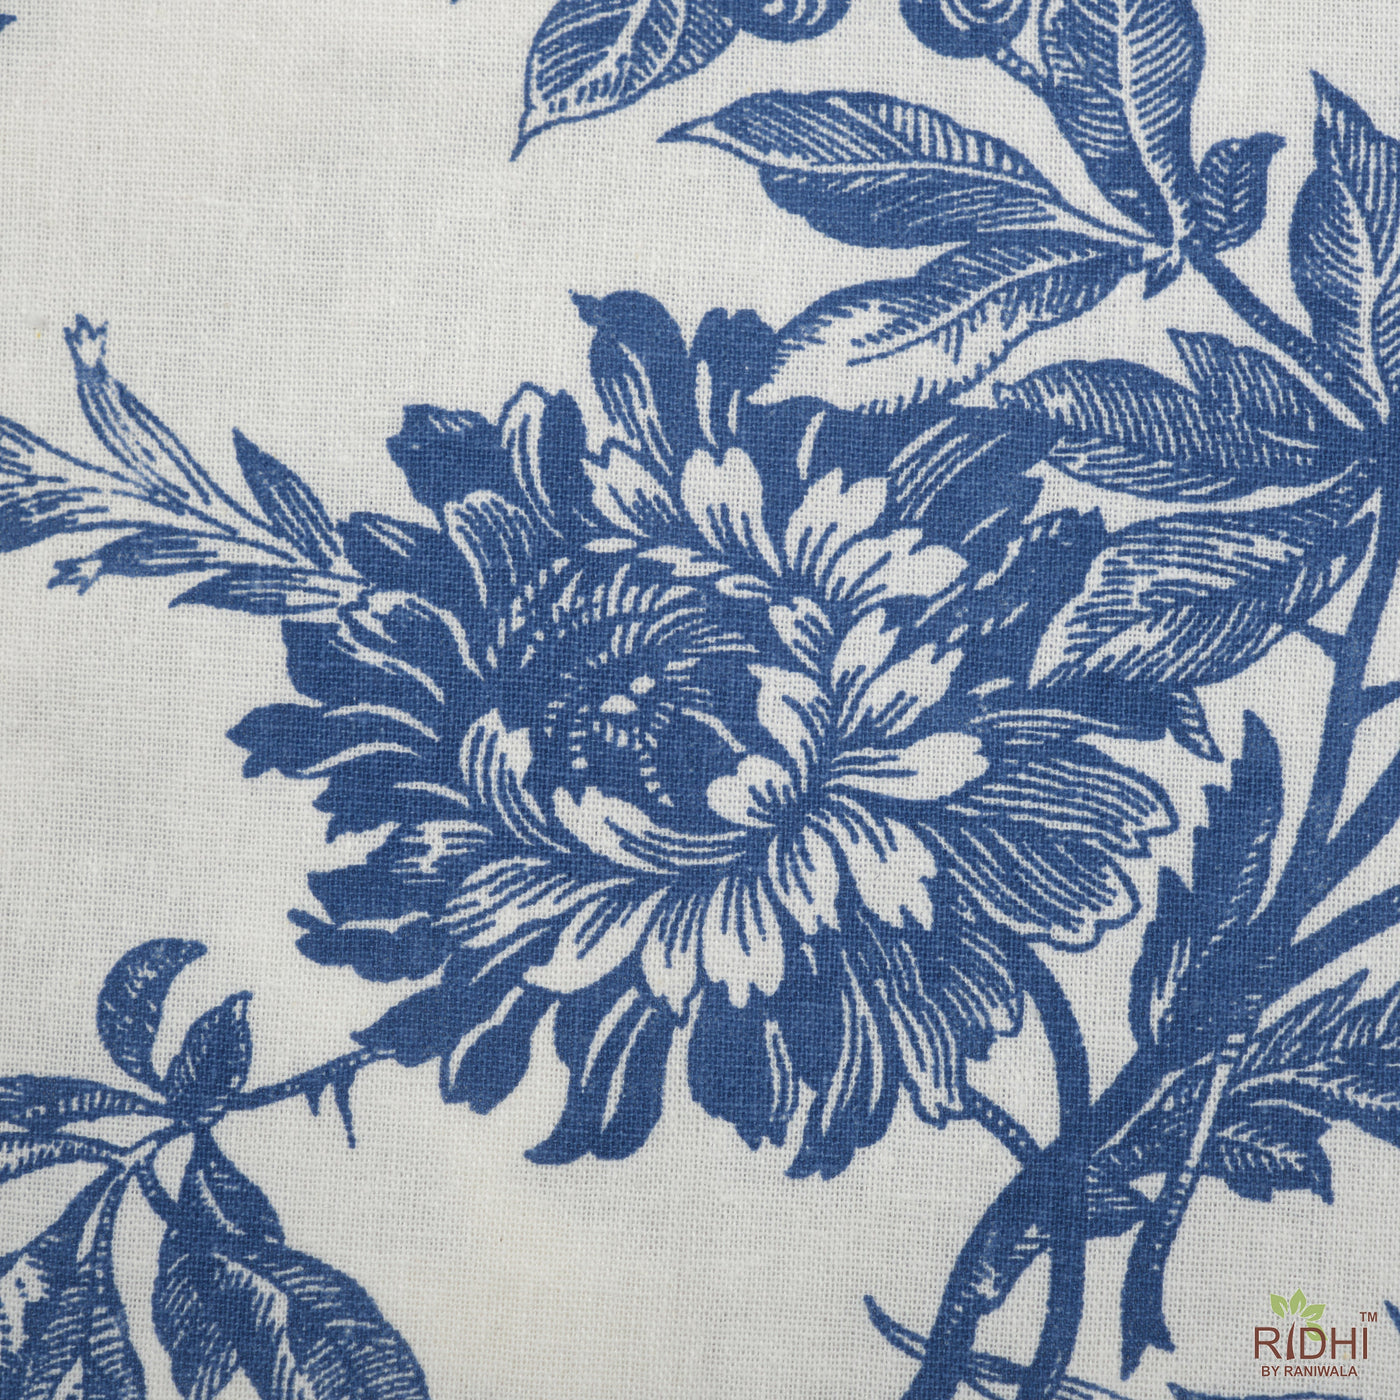 Incremental Blue and White Indian Floral Printed 100% Pure Cotton Cloth, Fabric for Curtains, Upholstery Fabric, Fabric by the Yard, Curtain